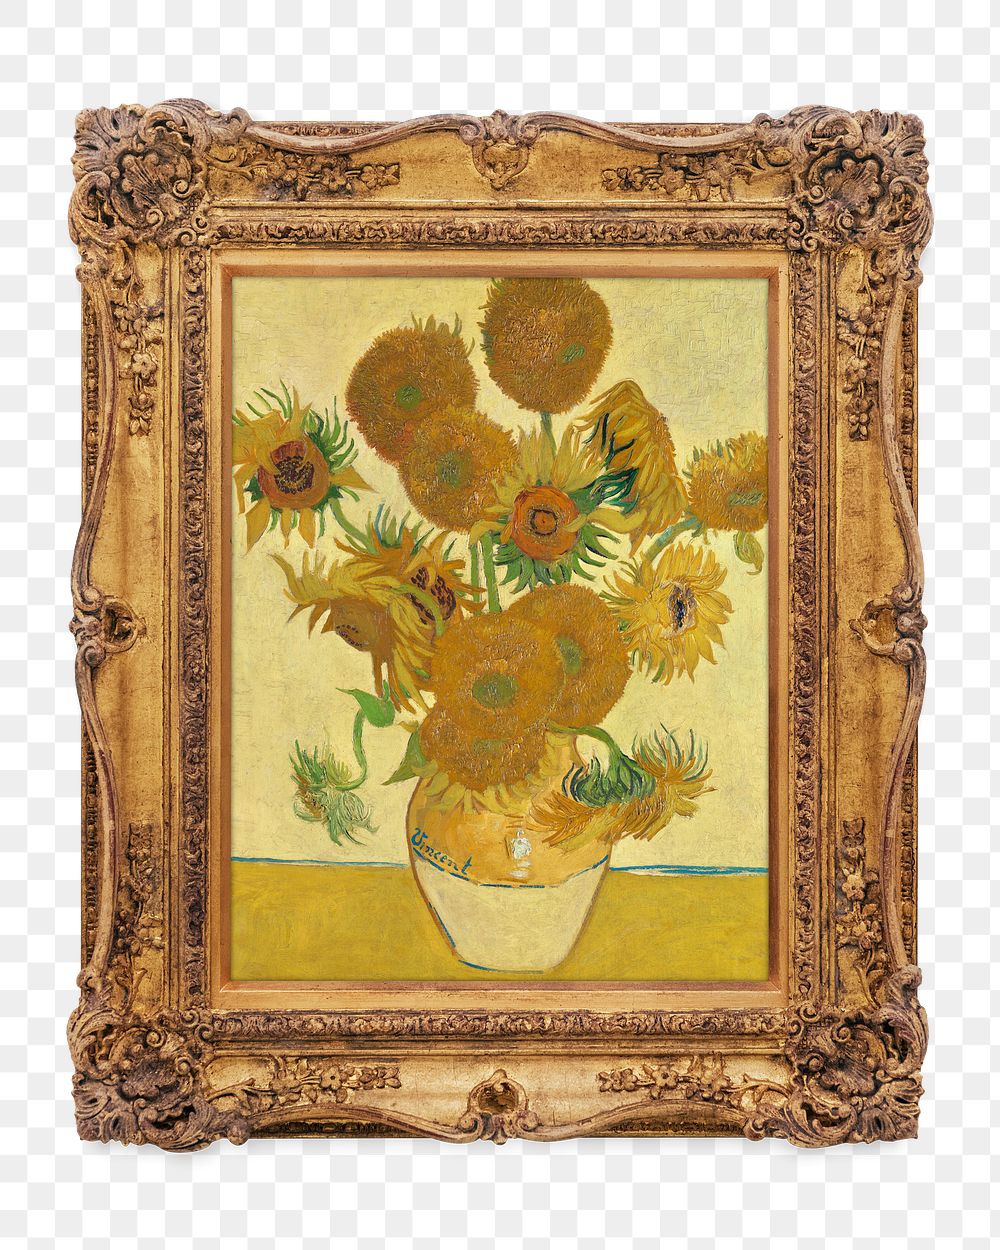 Png Van Gogh's sunflowers framed artwork, transparent background, remixed by rawpixel.